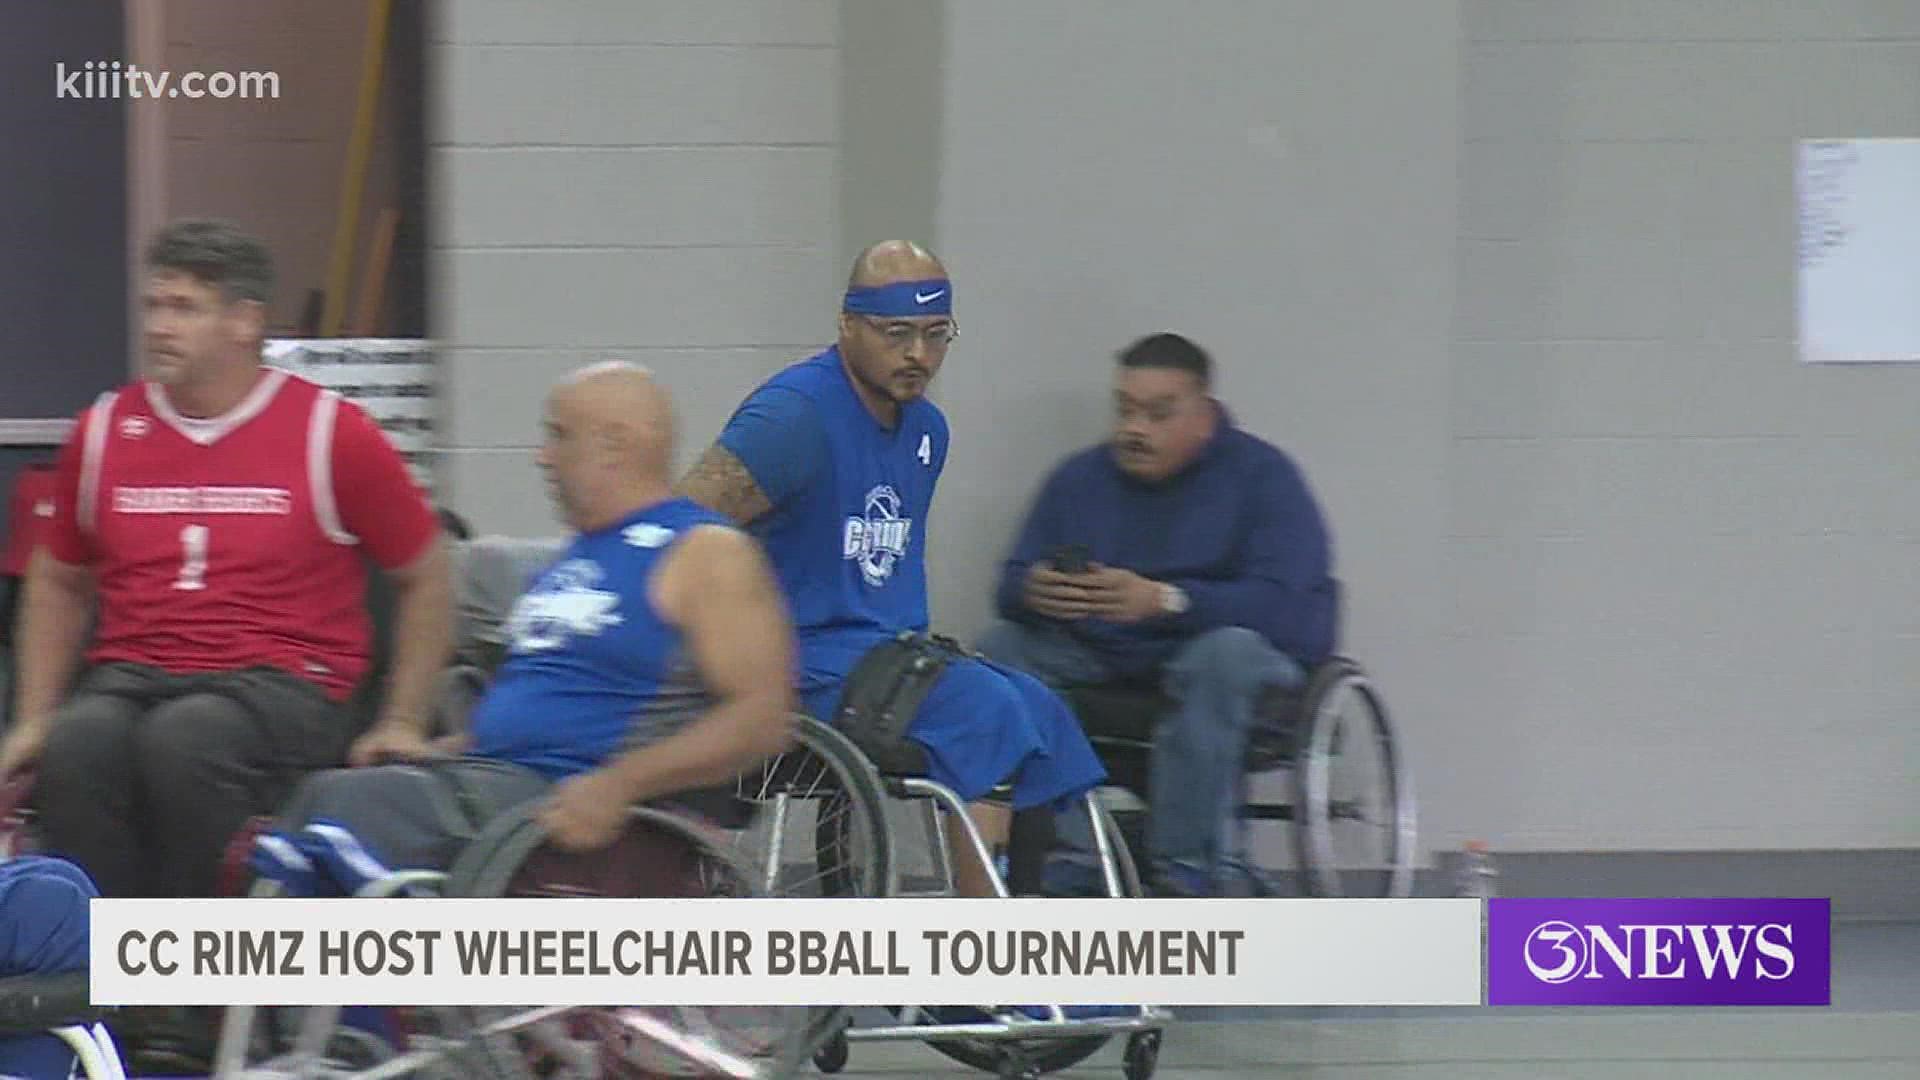 CC Rimz looking to dominate at the Bayfront Classic Wheelchair Basketball tournament. The CC Rimz play at 9 a.m. and noon.